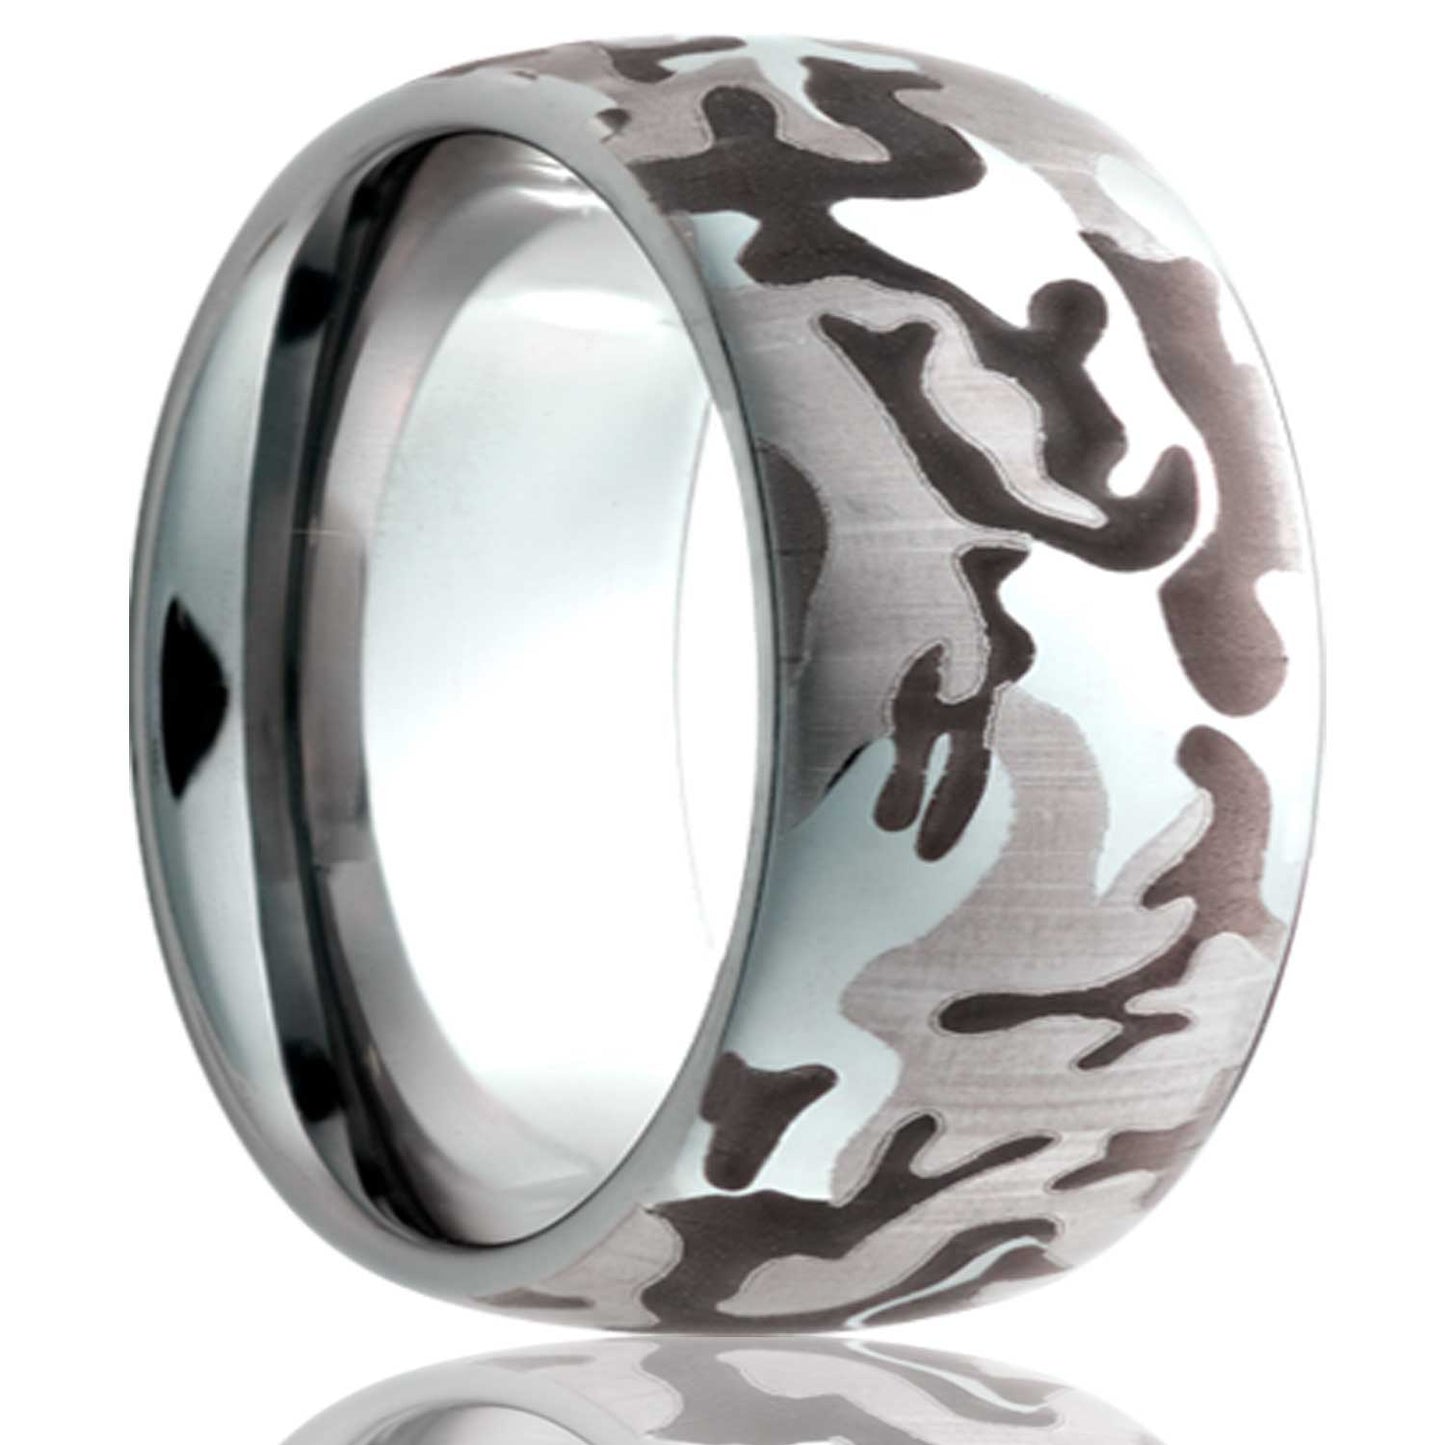 A engraved camo domed cobalt wedding band displayed on a neutral white background.